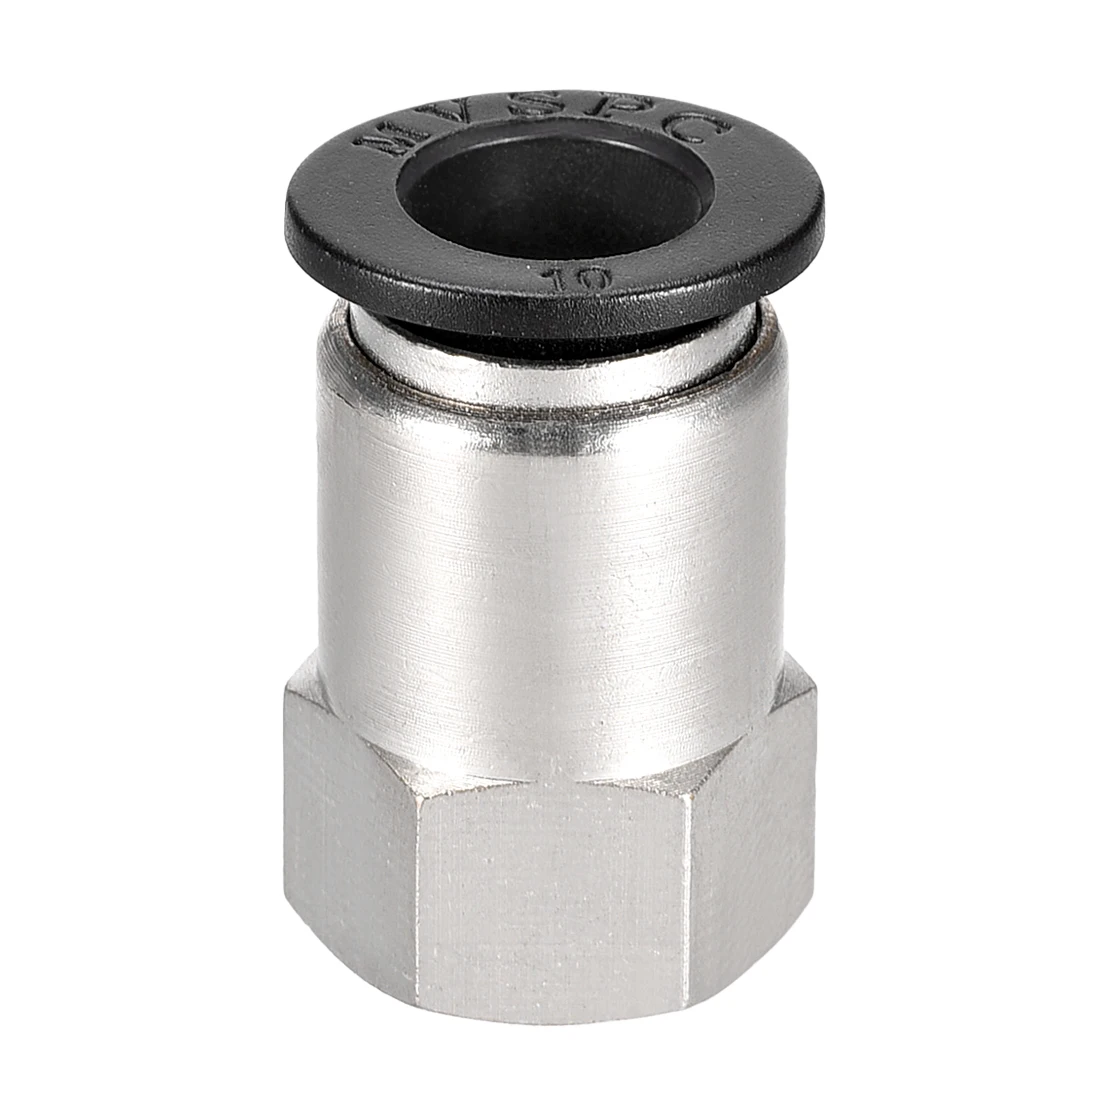 

uxcell Push to Connect Tube Fitting Adapter 10mm Tube OD x 1/8 NPT Female Straight Pneumatic Connecter Pipe Fitting